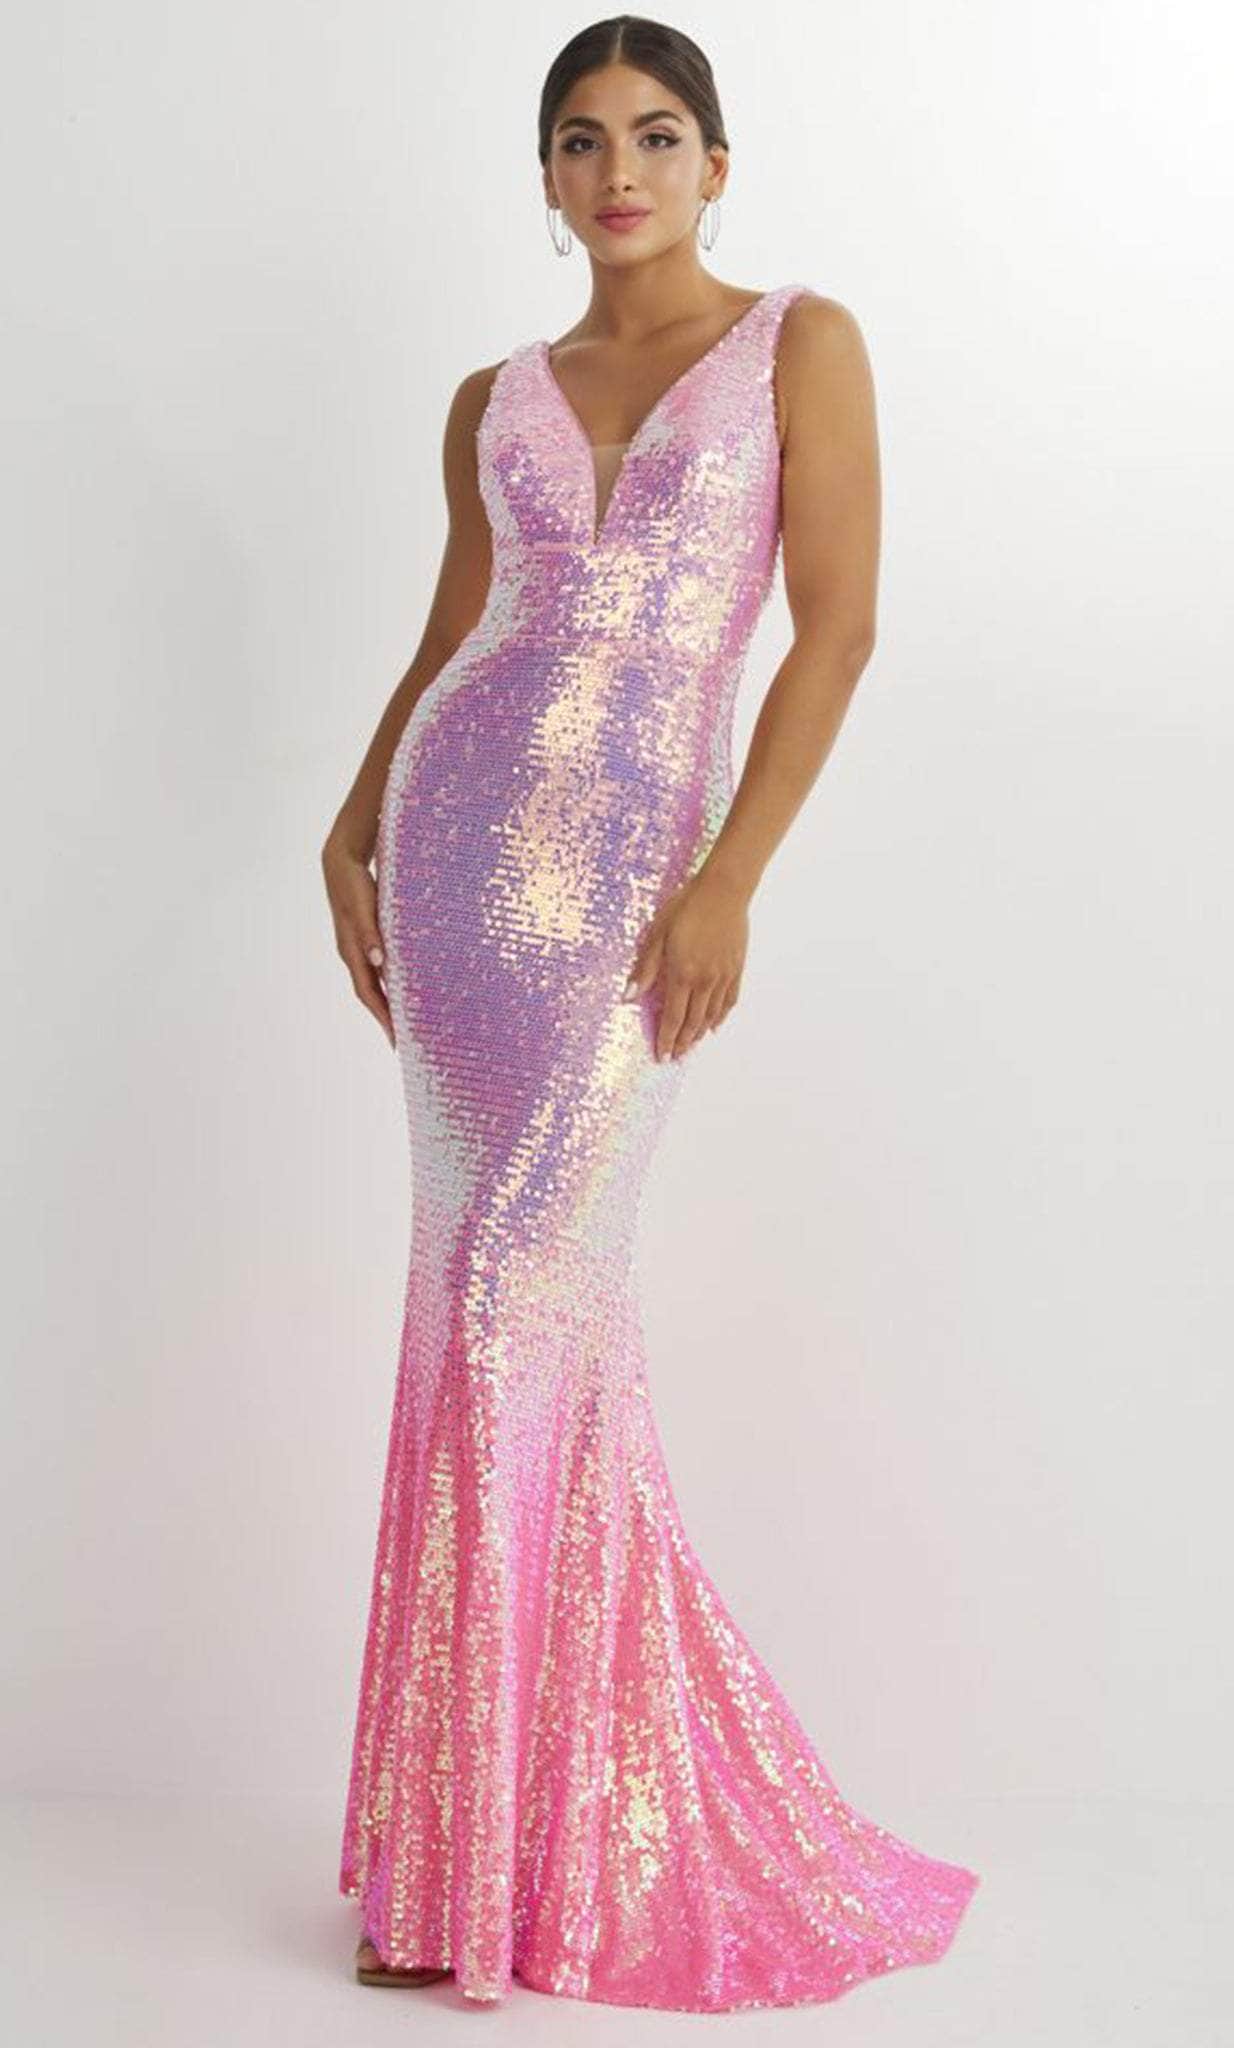 Studio 17 Prom 12885 - V-Neck Ombre Sequin Prom Gown
